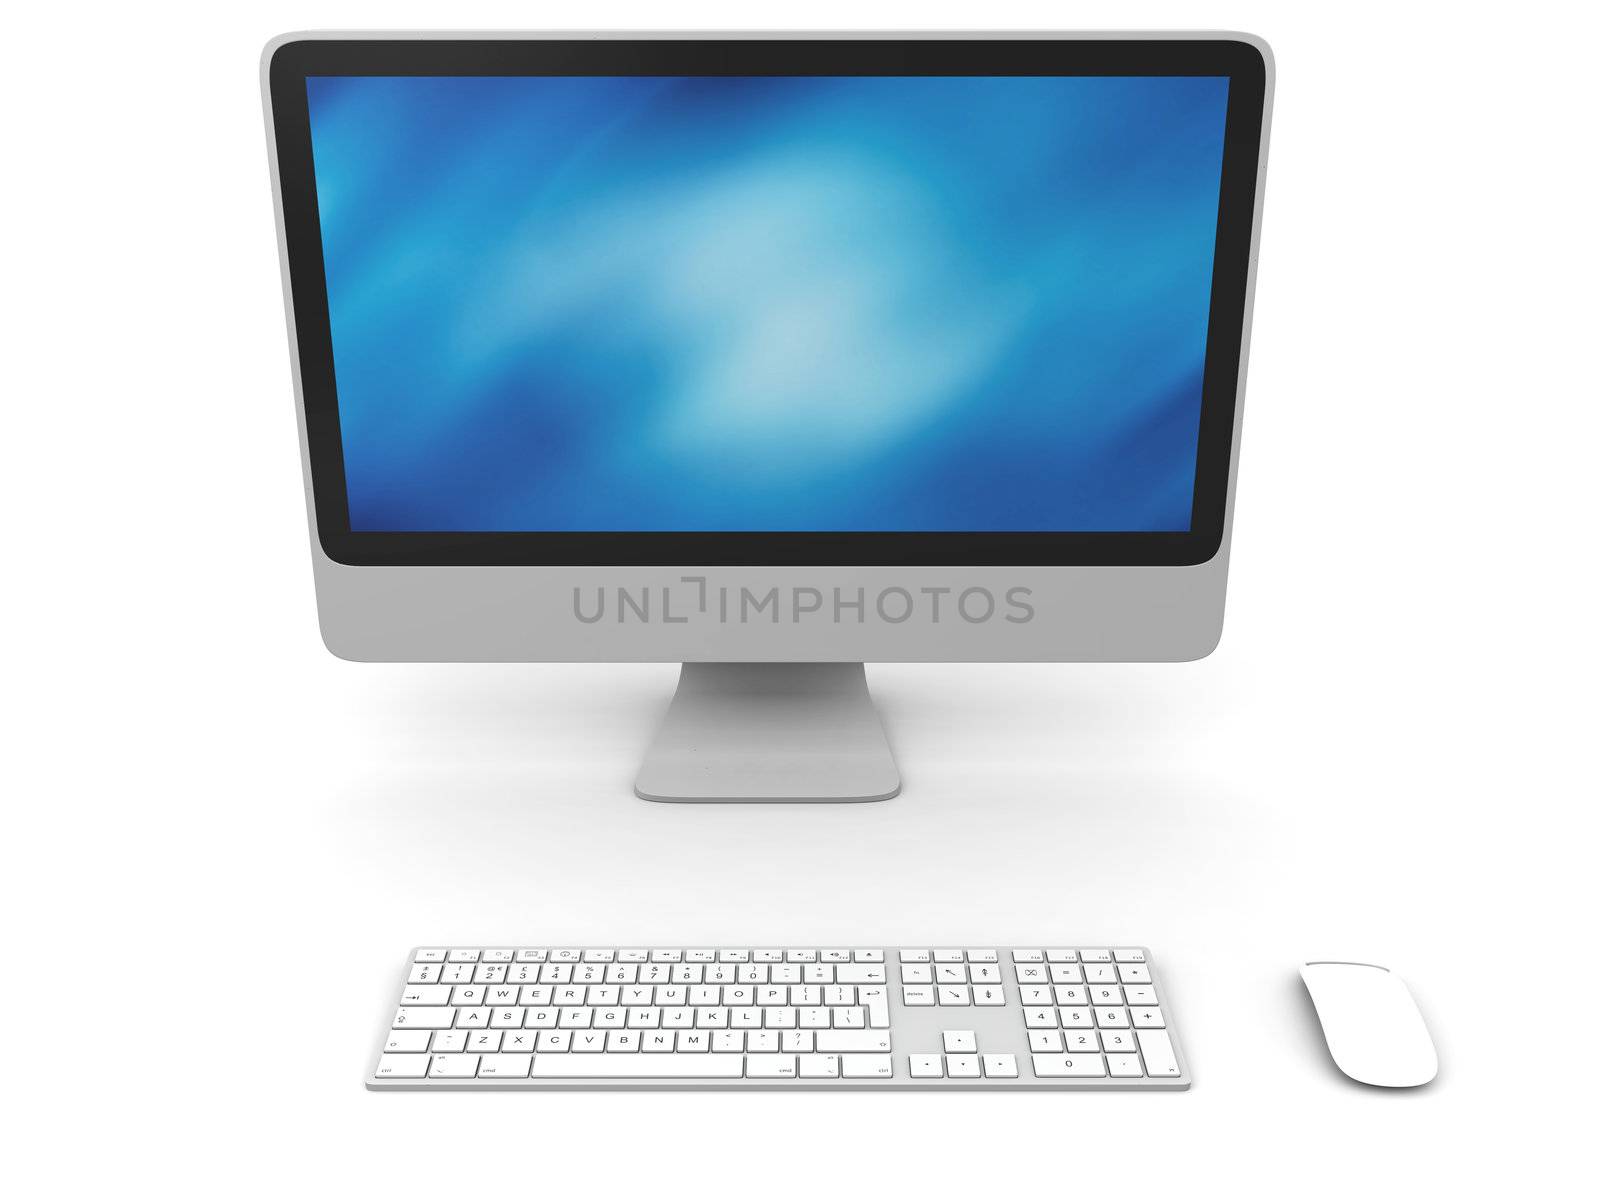 3D illustration of modern desktop computer with wireless keyboard and mouse